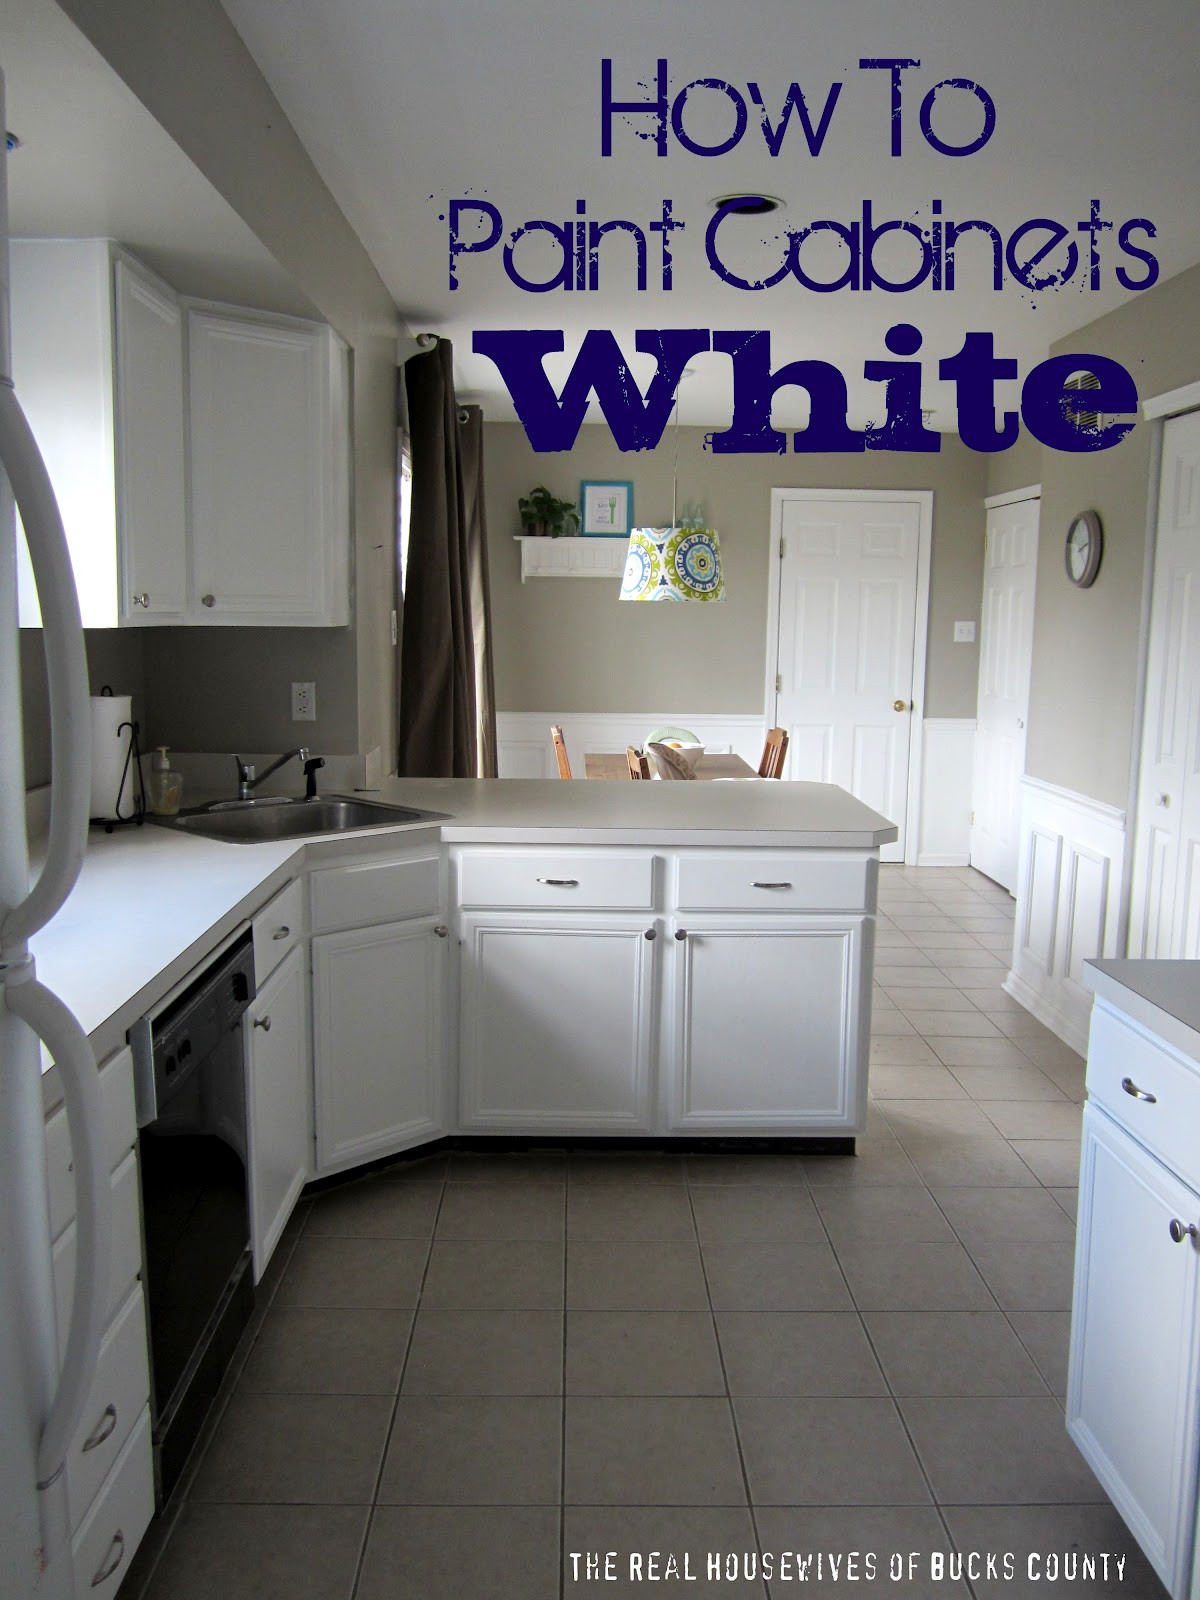 Repainting Kitchen Cabinets White
 How to Paint Cabinets White